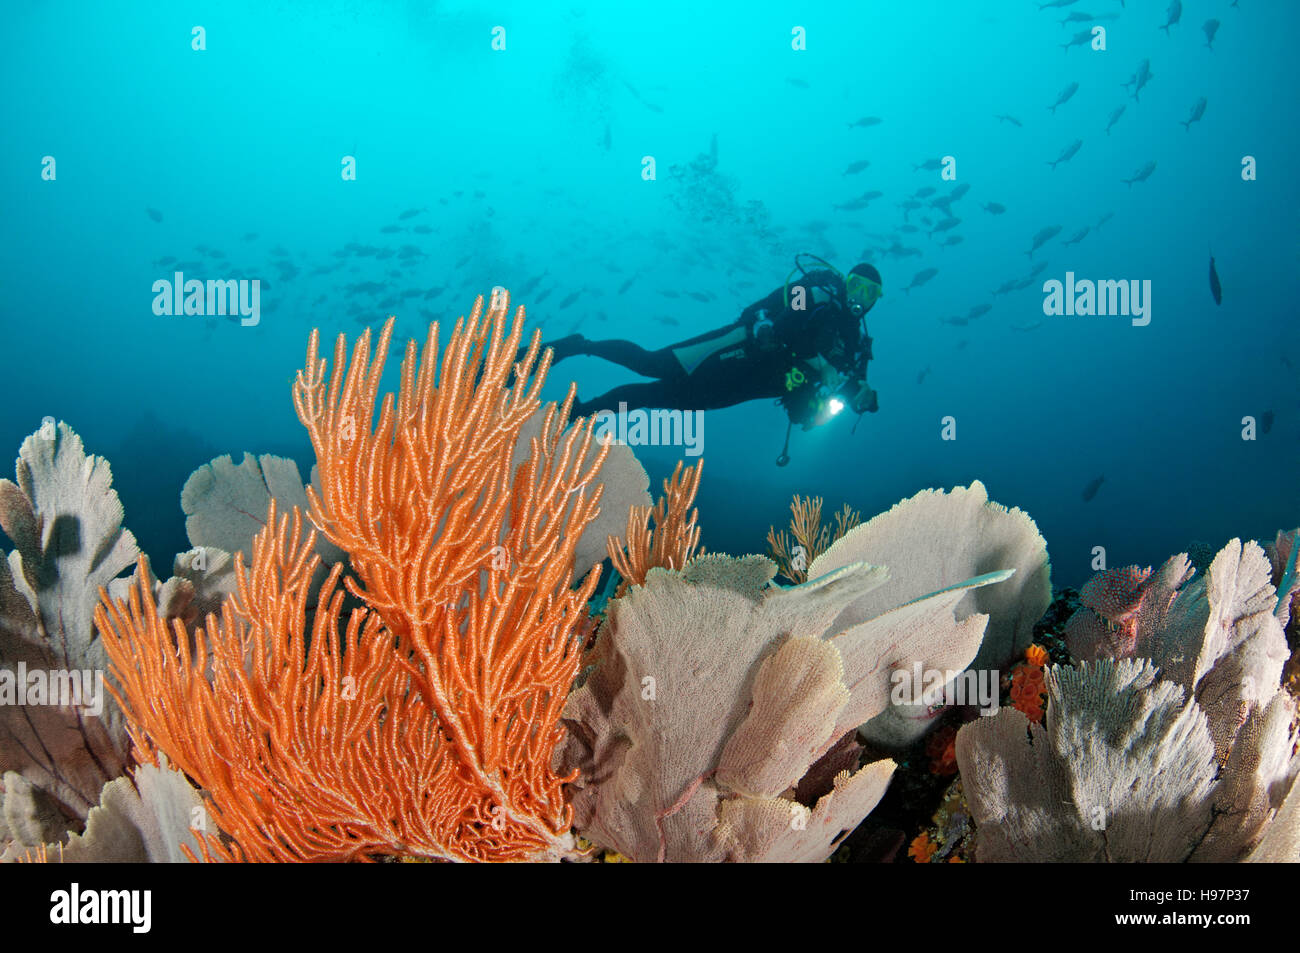 scuba diver and coralreef with seafans at Coiba, Panama, Coiba, Panama, East Pacific Ocean Stock Photo